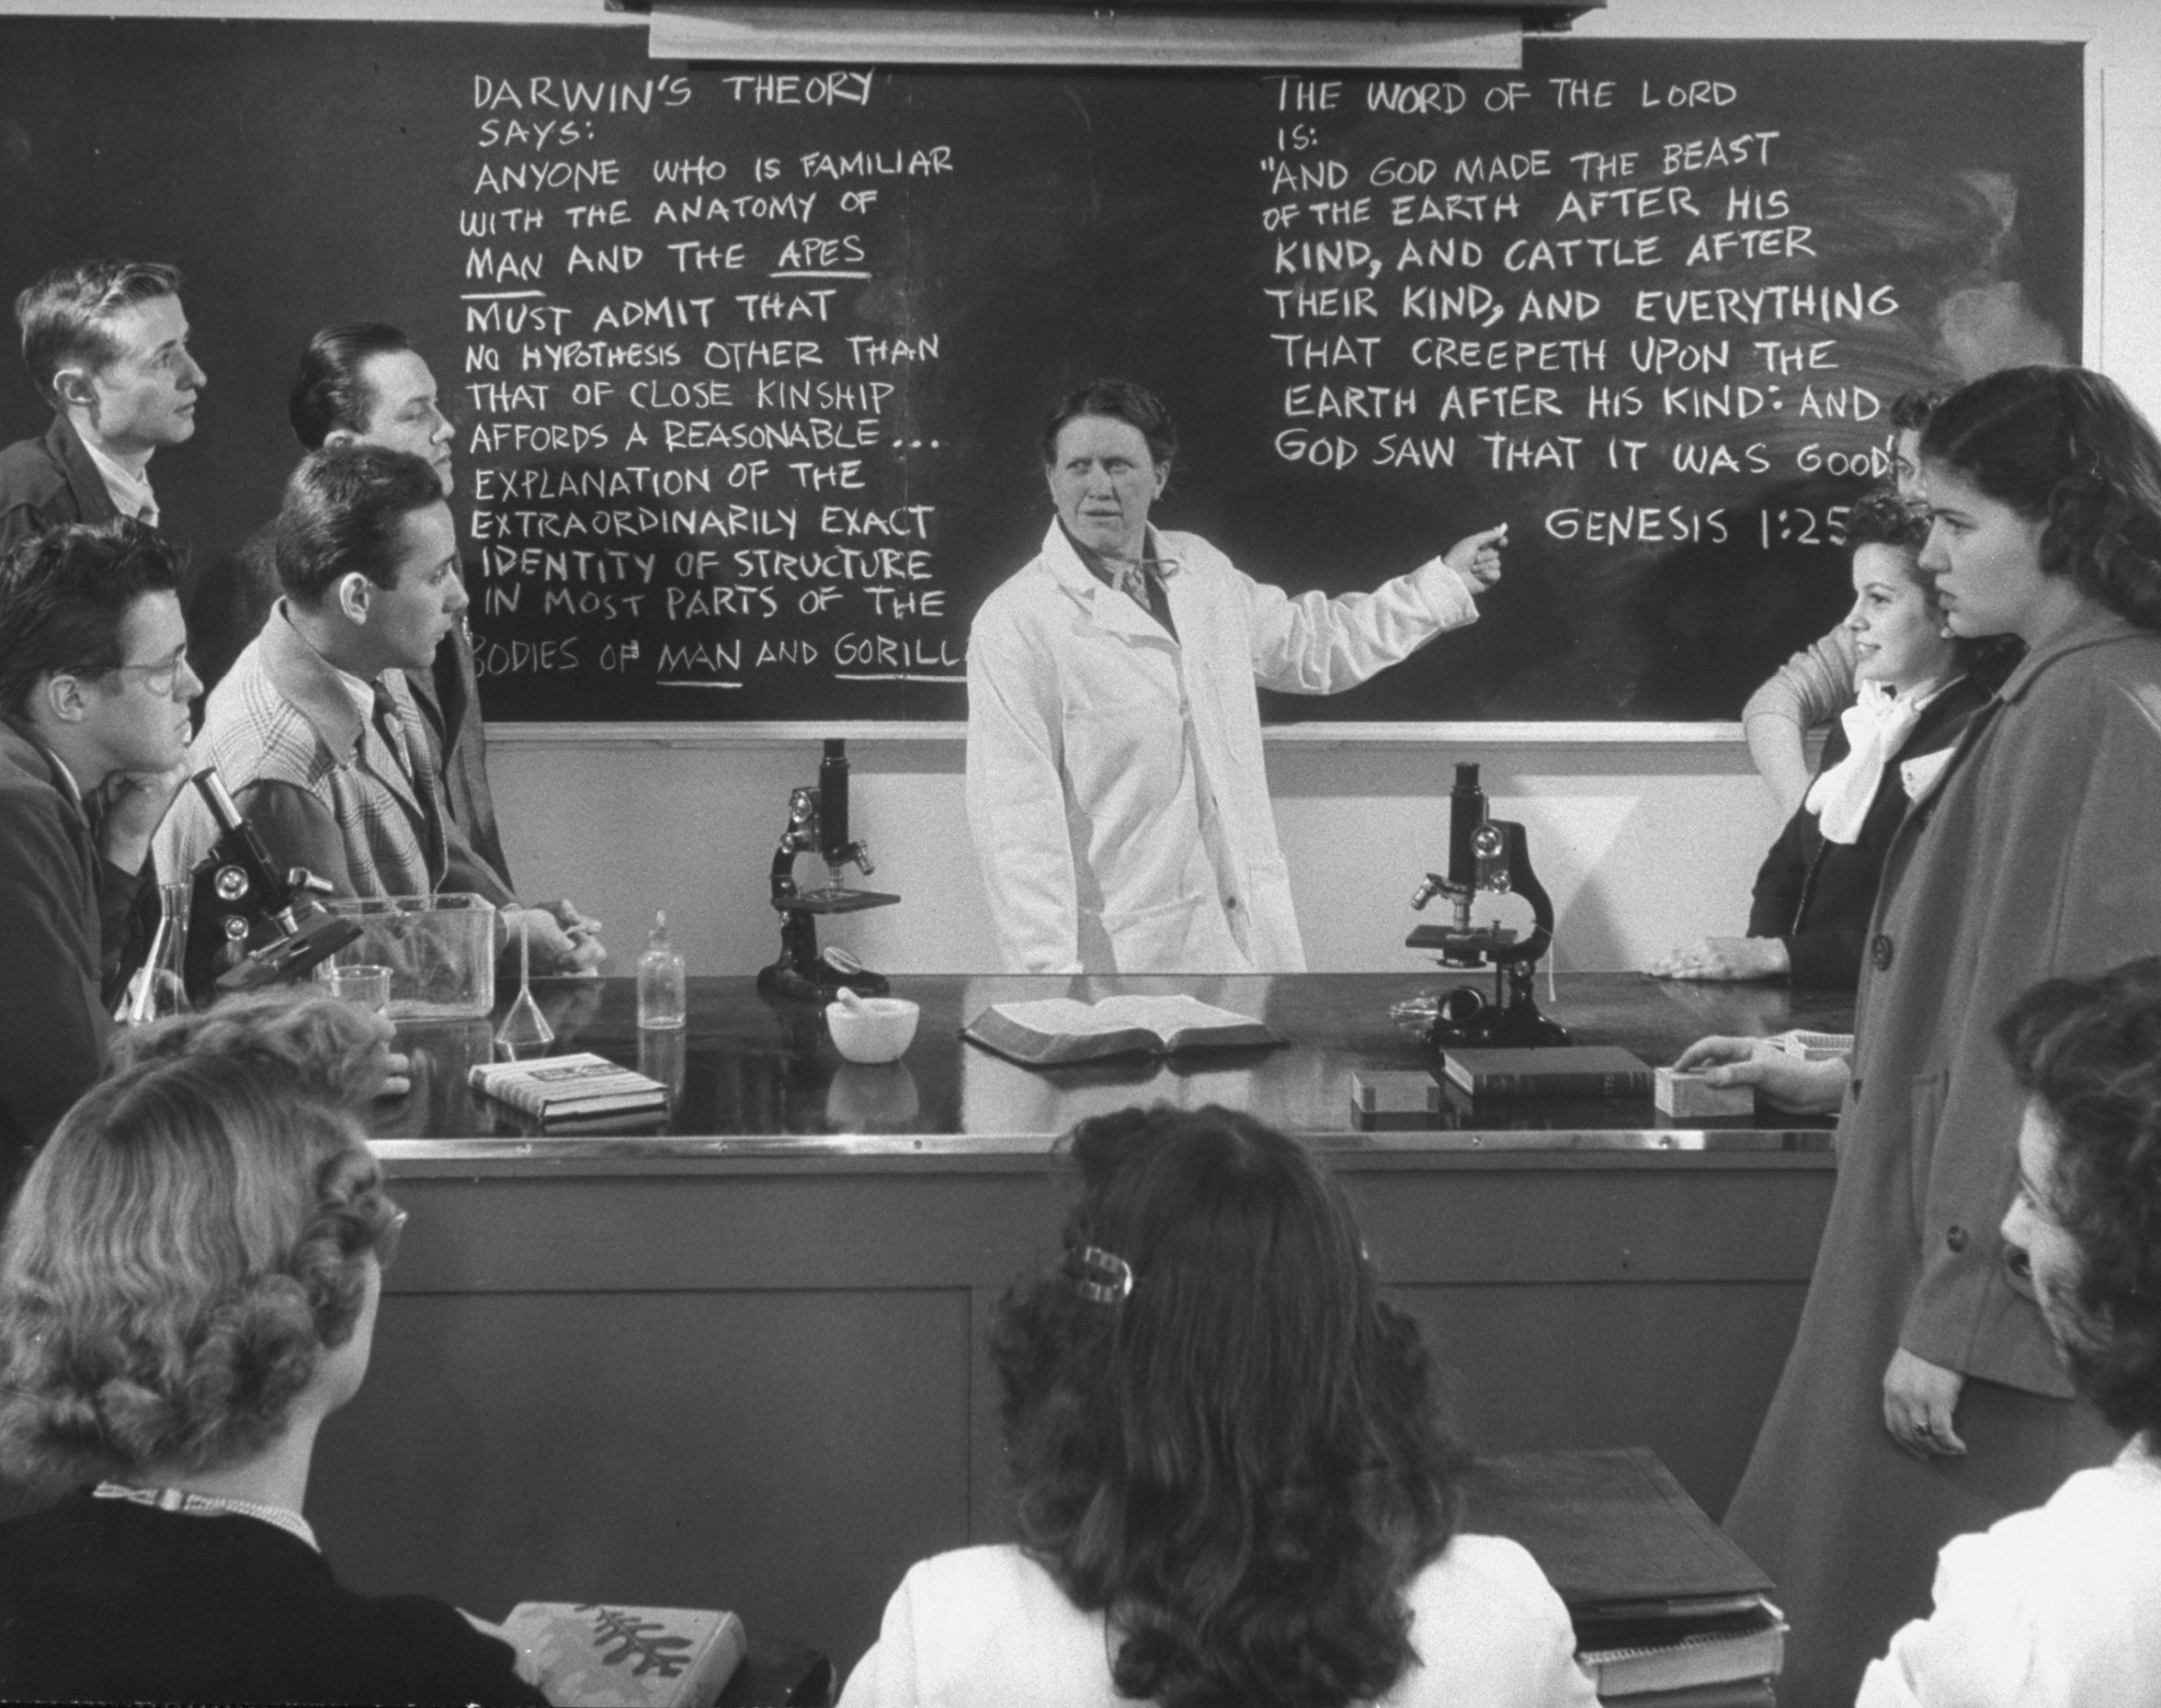 Back to the future? At South Carolina's Bob Jones University, Dr. Maude Stout "teaches the controversy" over evolution in 1948.